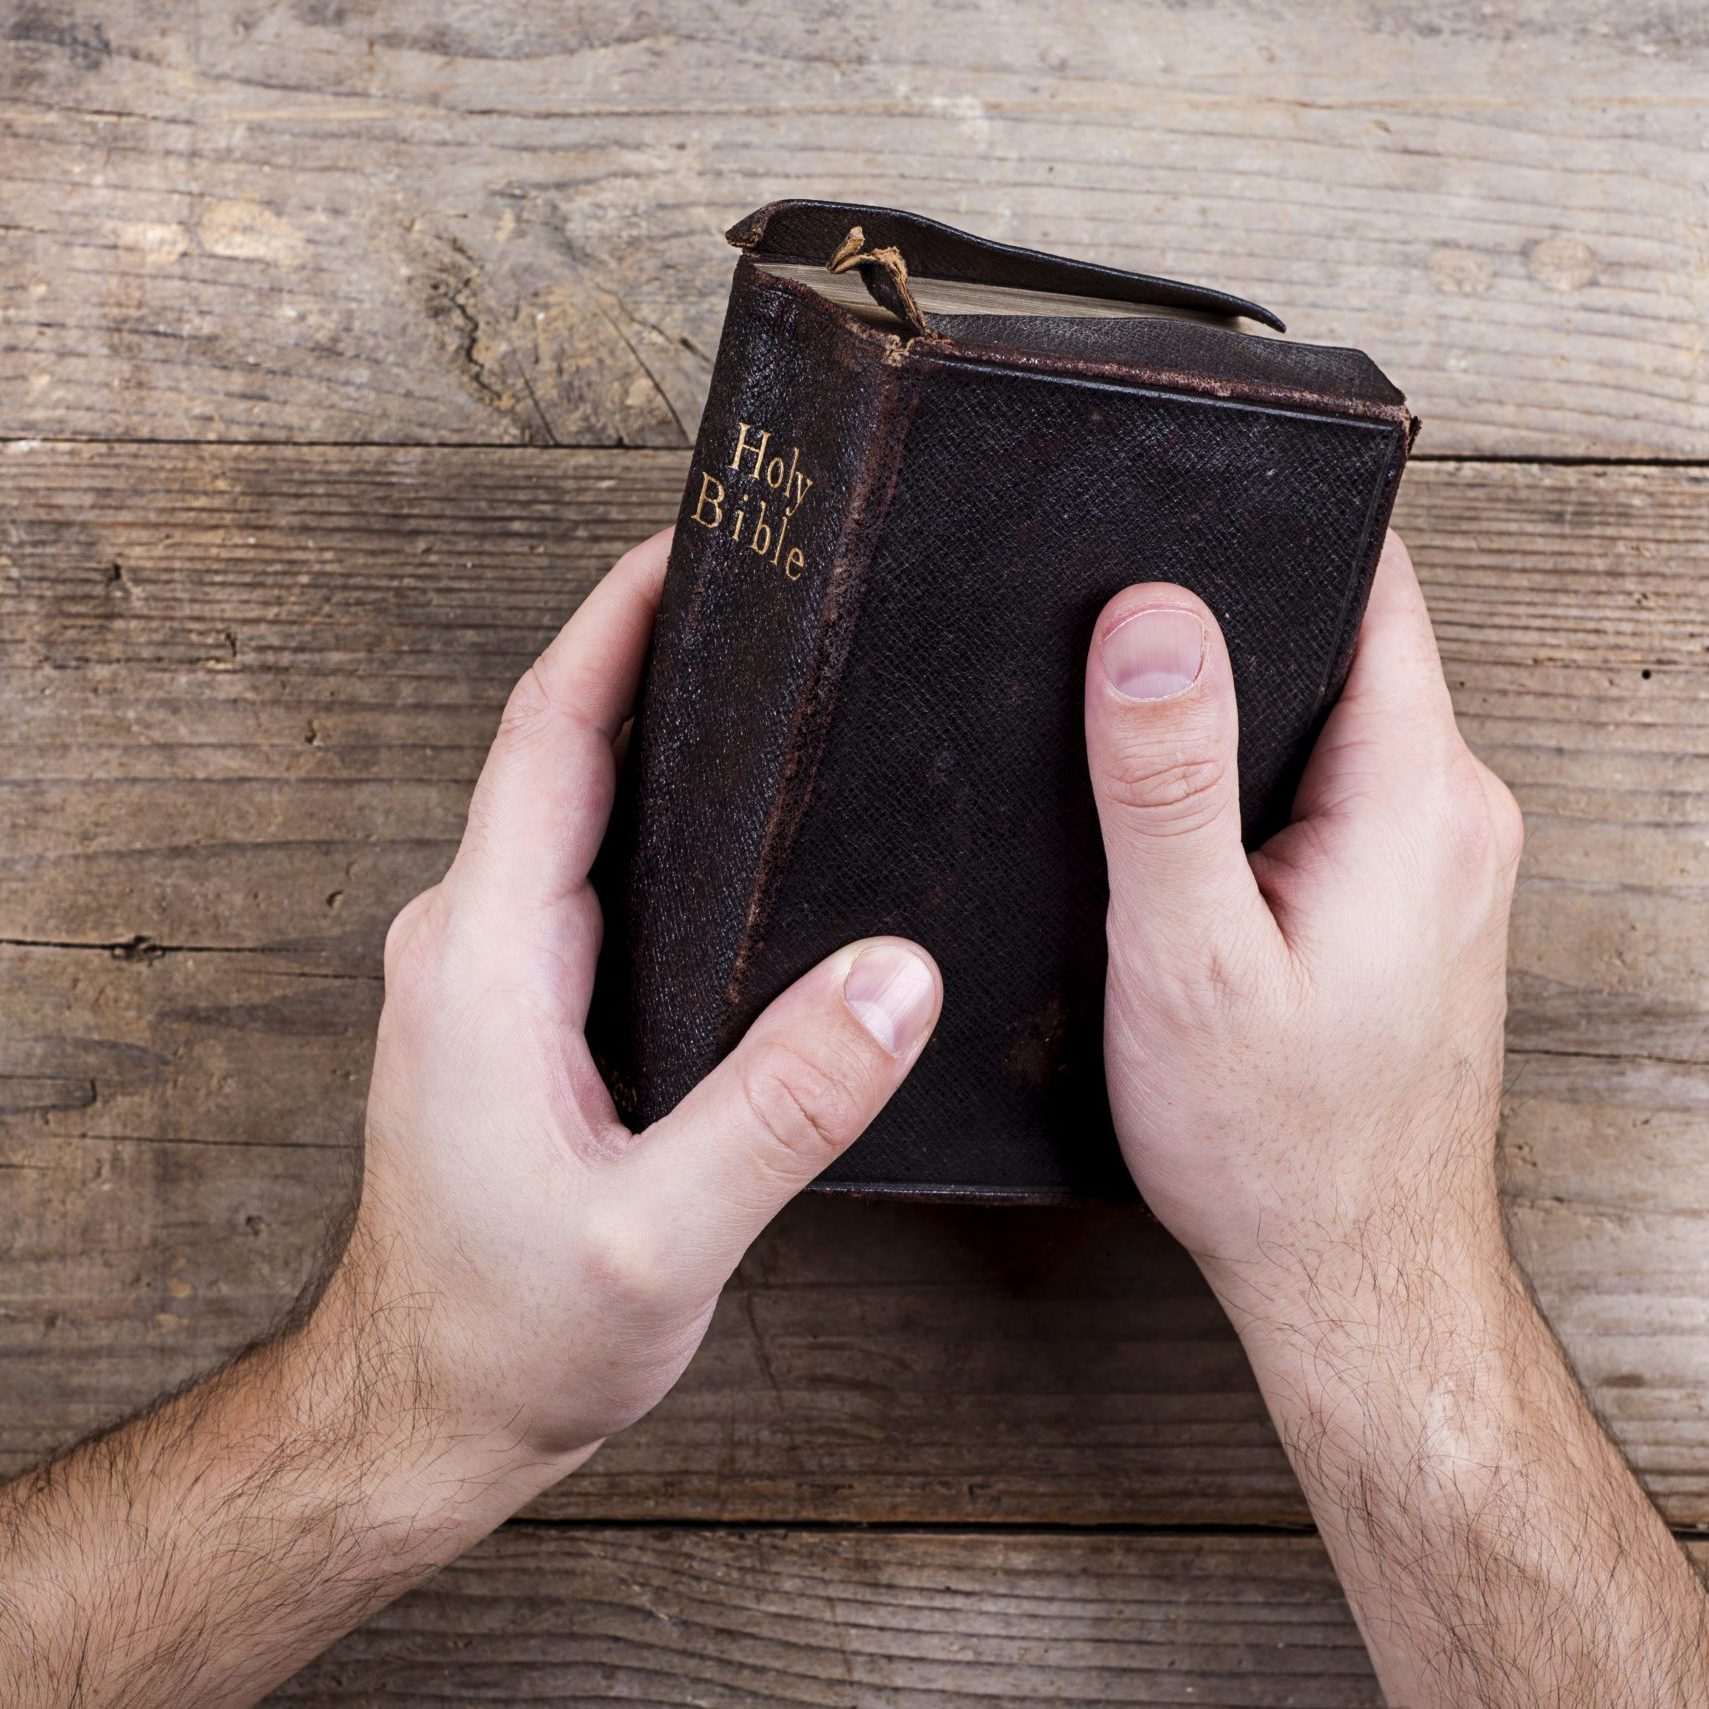 Hands holding Bible on a wooden desk background.